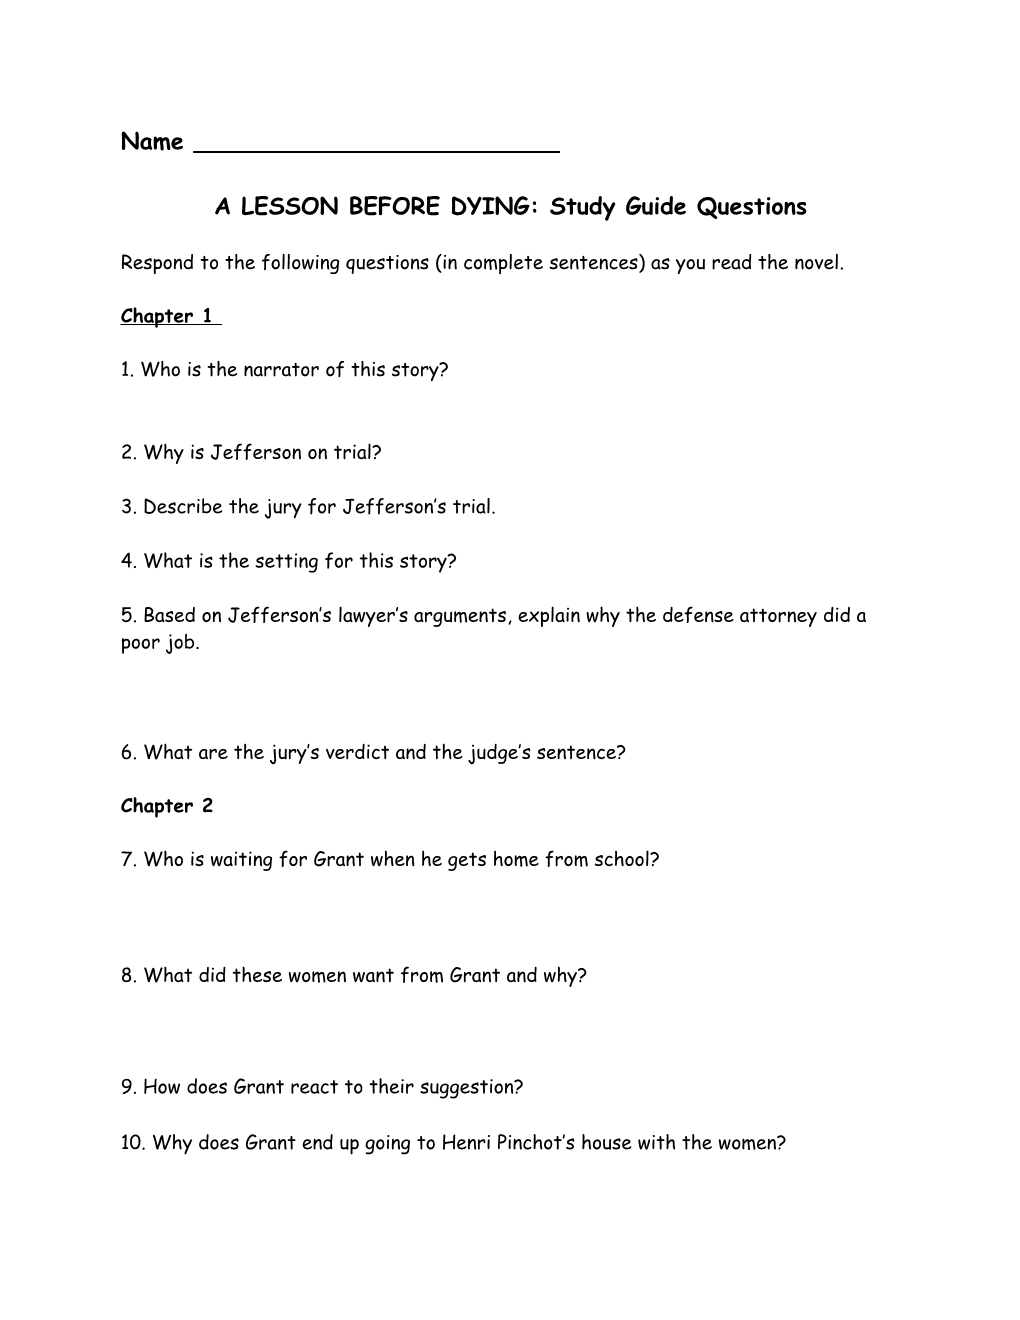 A LESSON BEFORE DYING: Study Guide Questions